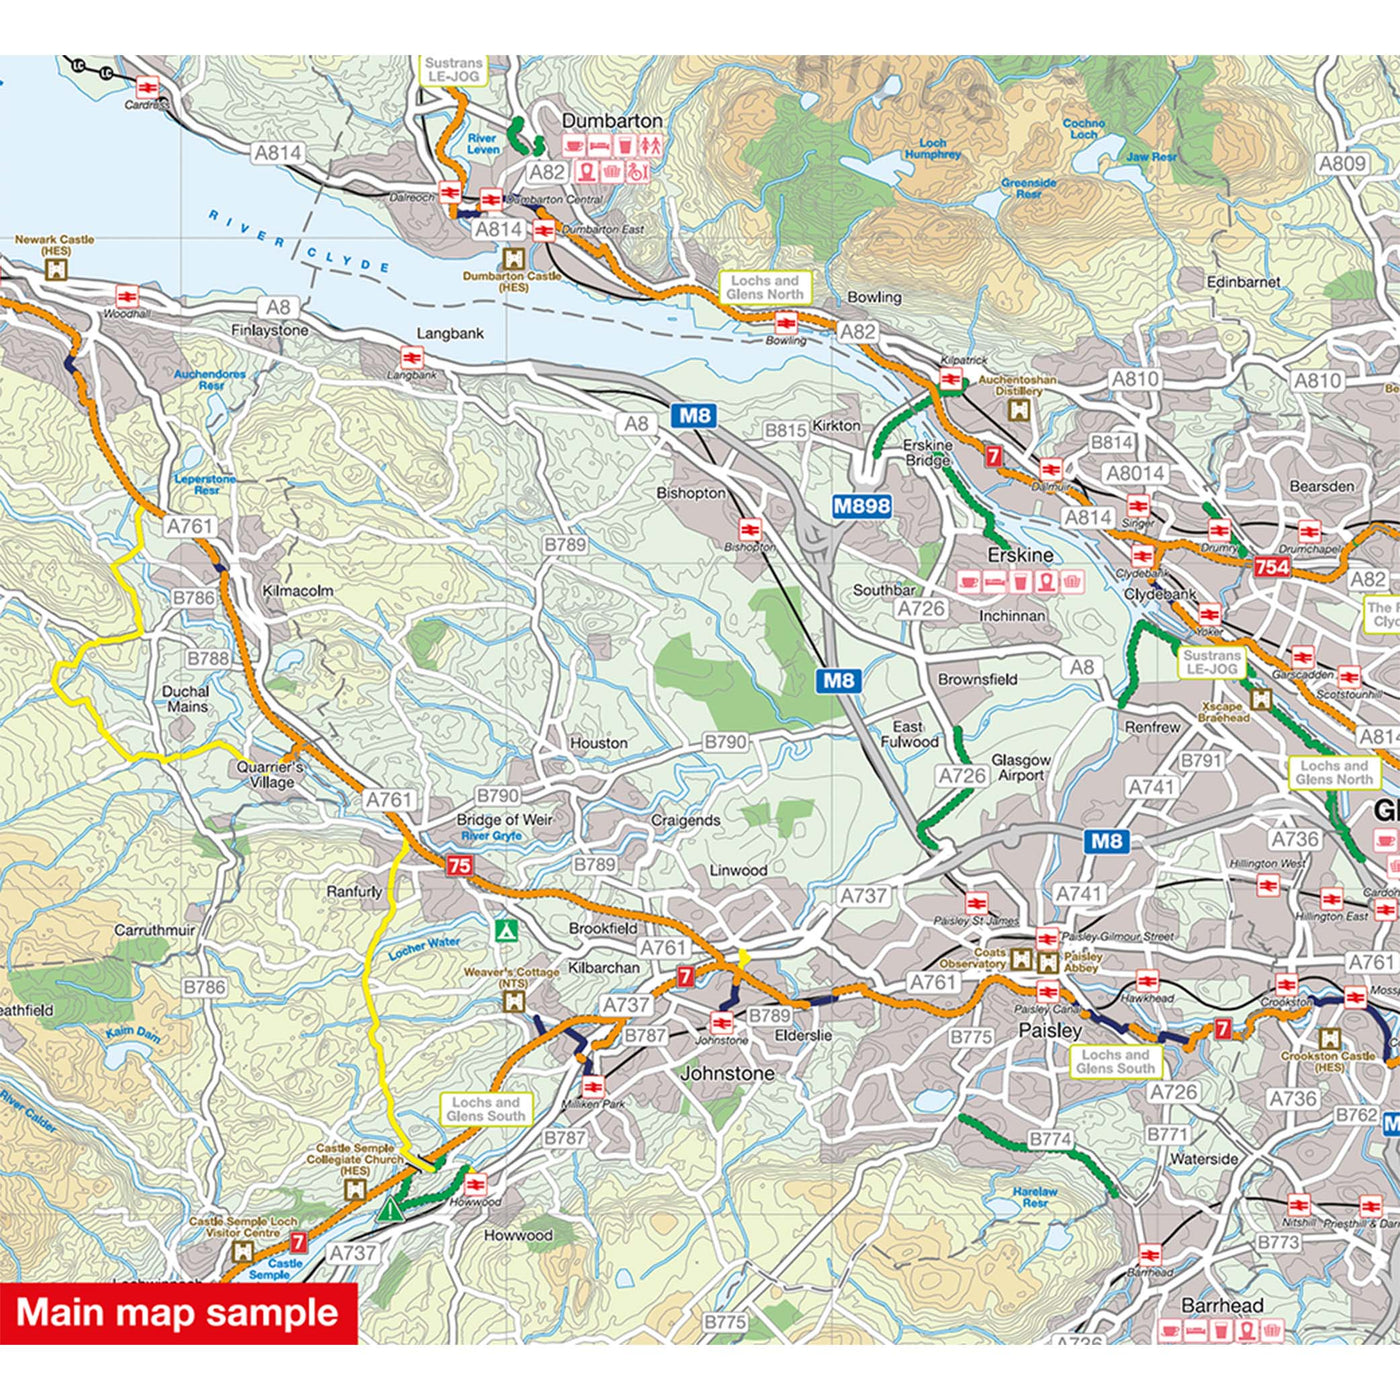 Main map sample of the Glasgow, Stirling and the Clyde cycle map